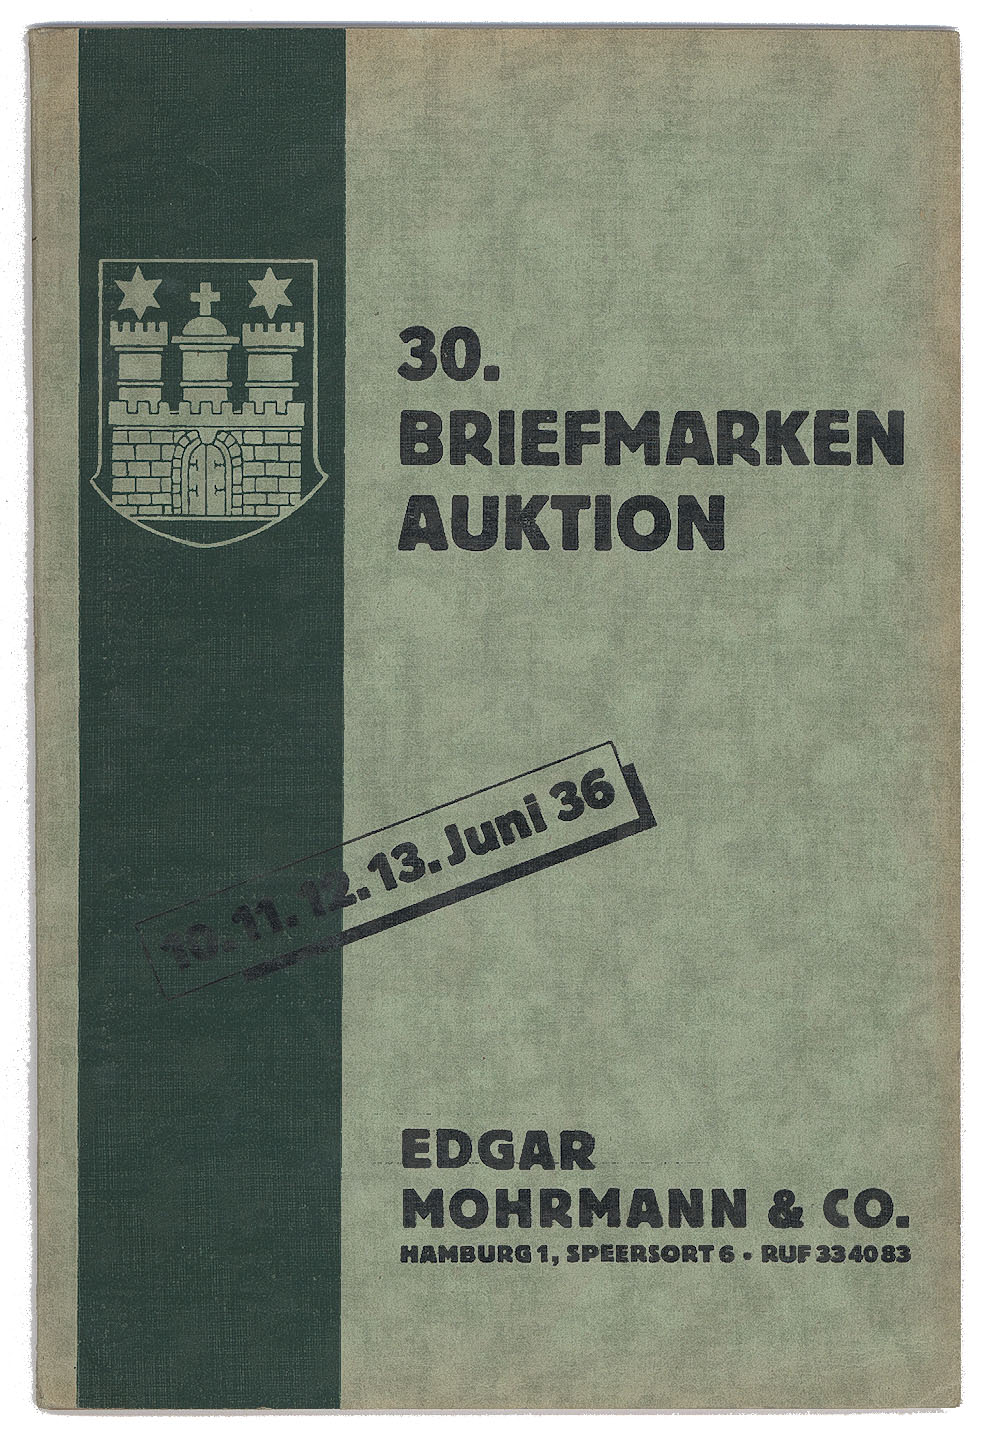 titel page of the catelogue for the 24th Edgar Mohrman auction (June 1934)